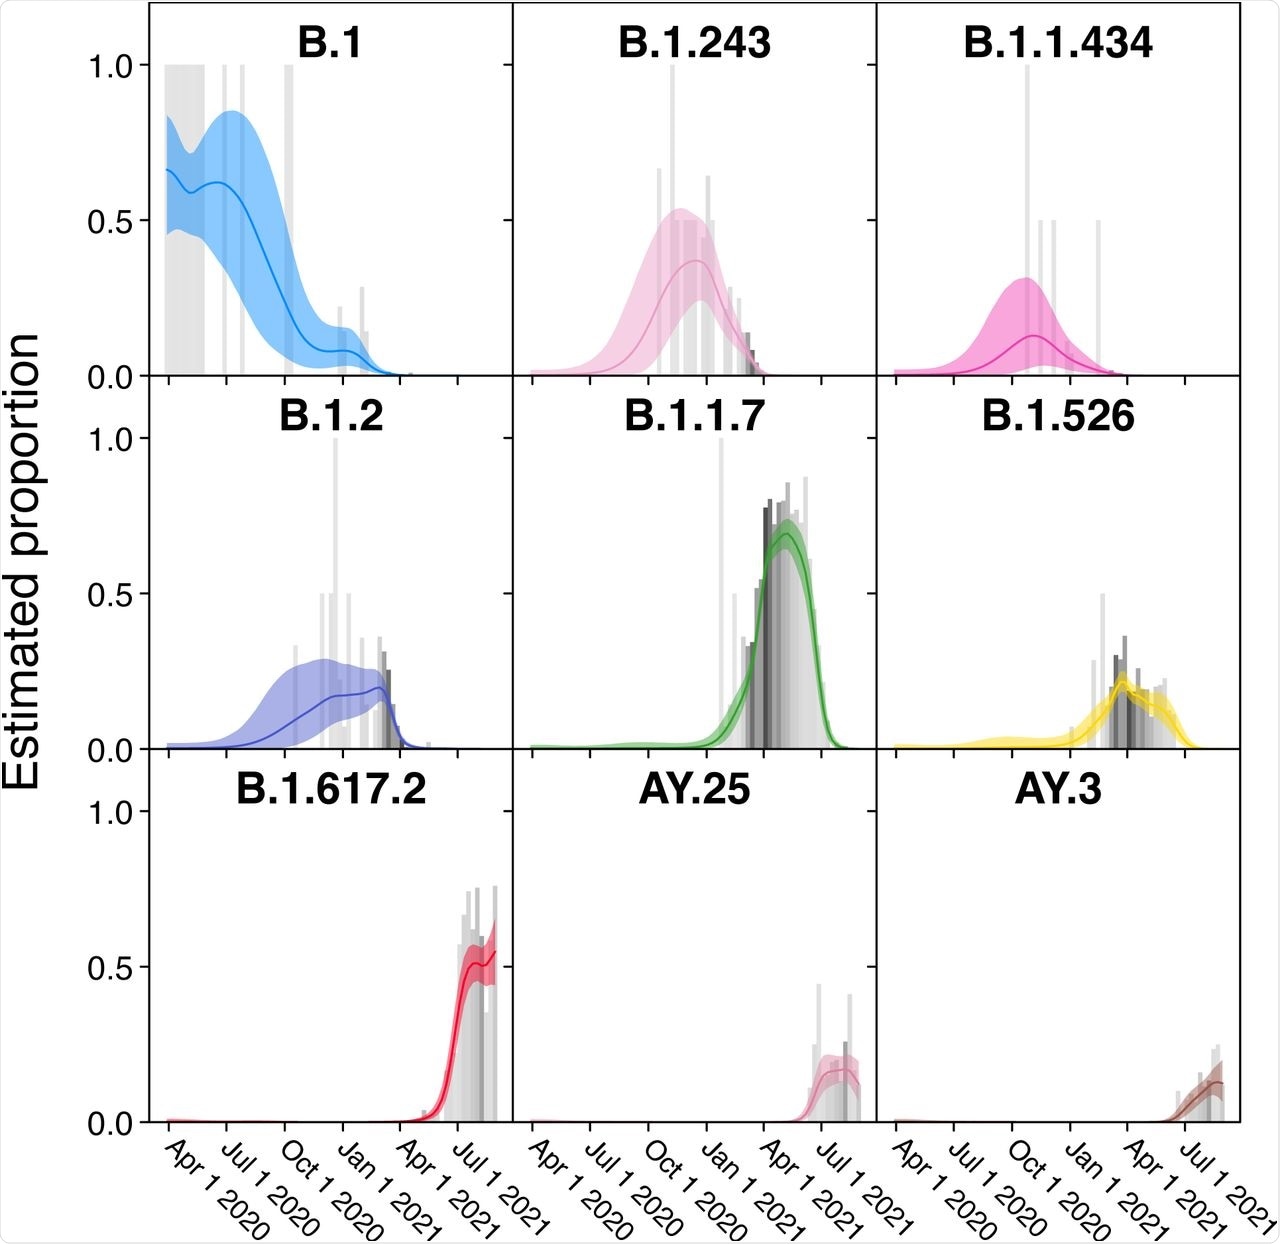 Frequencies of individual variants estimated using Bayesian autoregressive moving average multinomial logistic regression. Time is shown along the x-axis and estimated proportions of the surveillance population along the y-axis. The grey bars indicate raw proportions from the count data shaded by the number of observations observed in a given week (darker indicating more samples) while the colored lines indicate the proportion estimated by the Bayesian model. The light colored envelopes around each line show the 95% credible intervals for the proportion. Only lineages achieving an estimated proportion of >10% in any given week are shown.